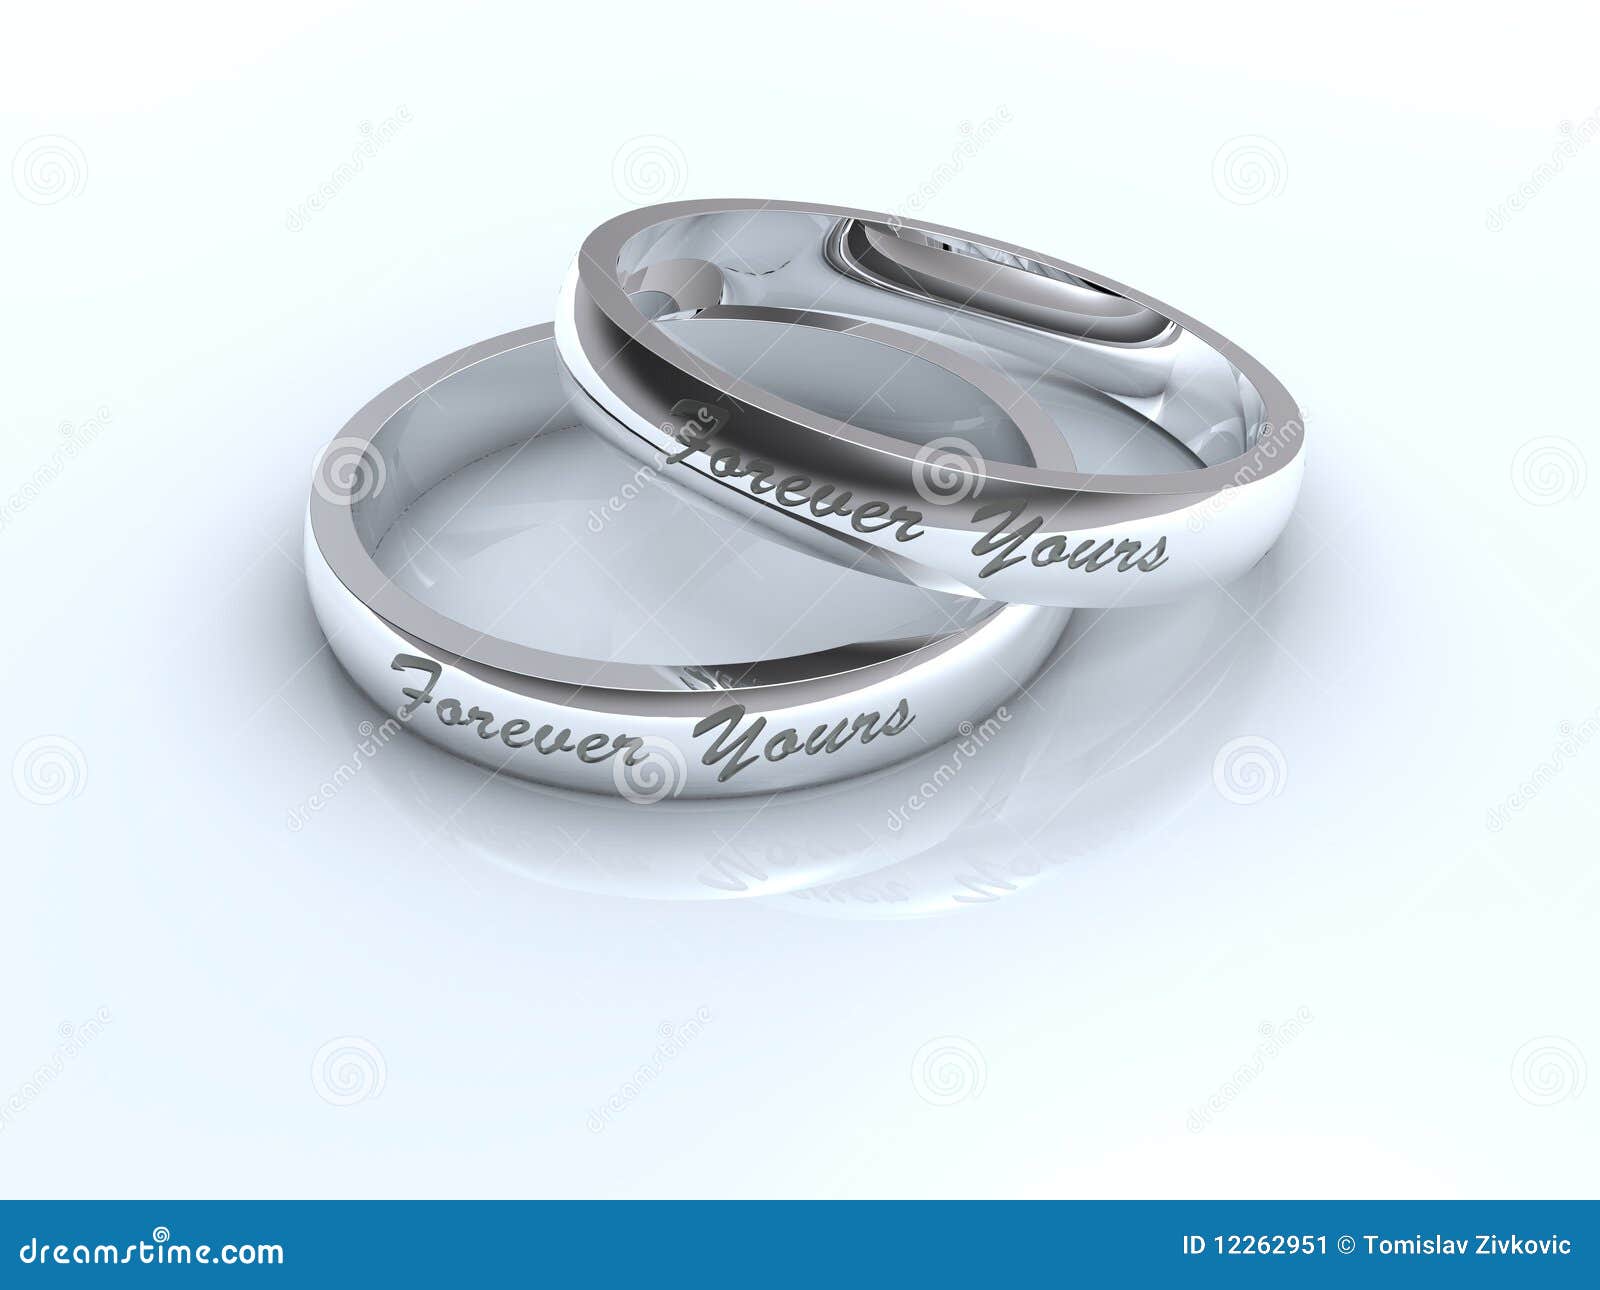 More similar stock images of ` Silver wedding rings `